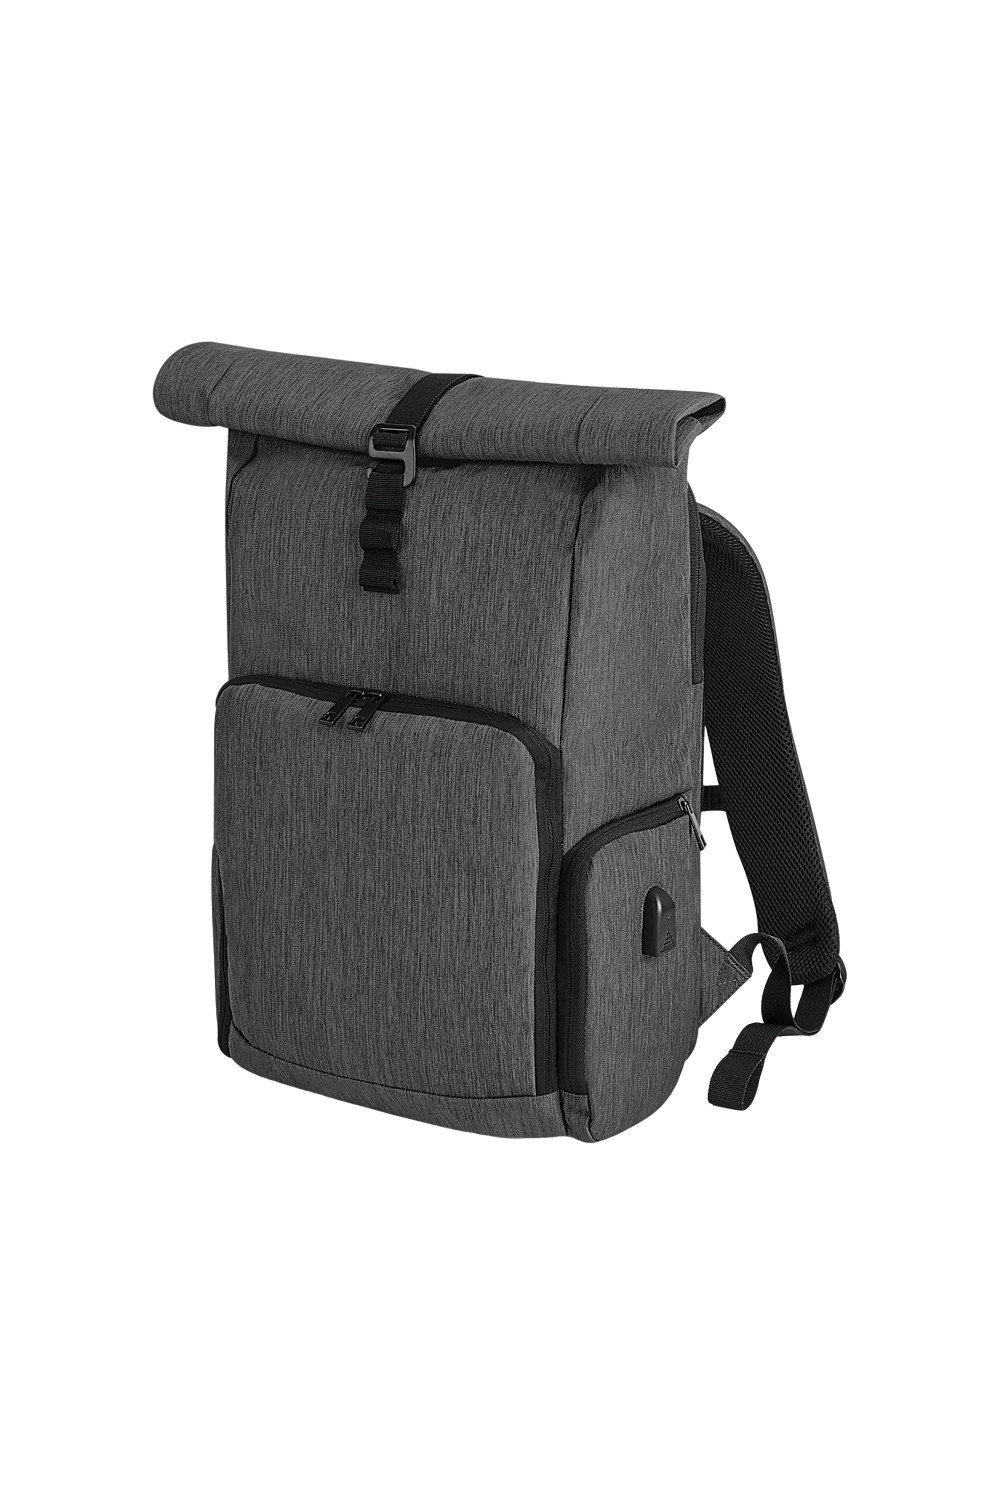 Q-tech Charge Roll Up Hiking Backpack